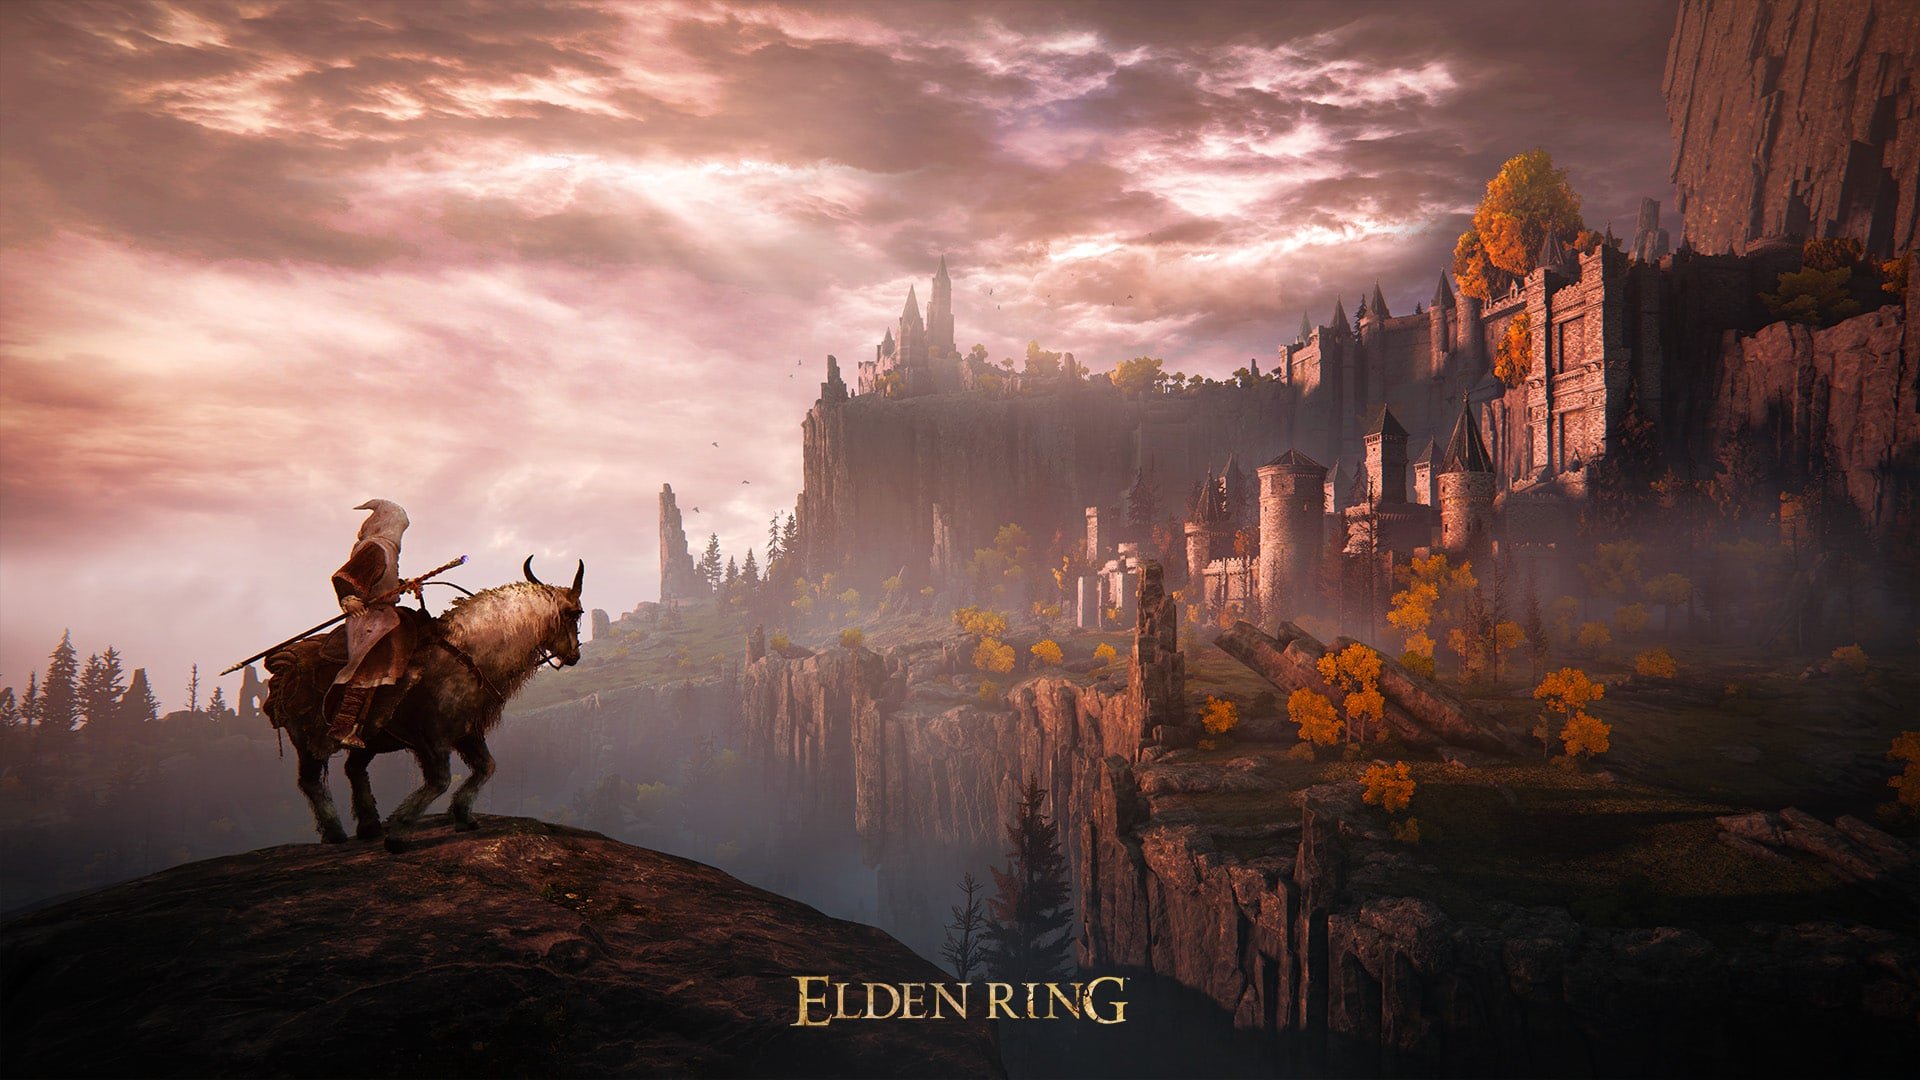 A depiction of Elden Ring's Open World